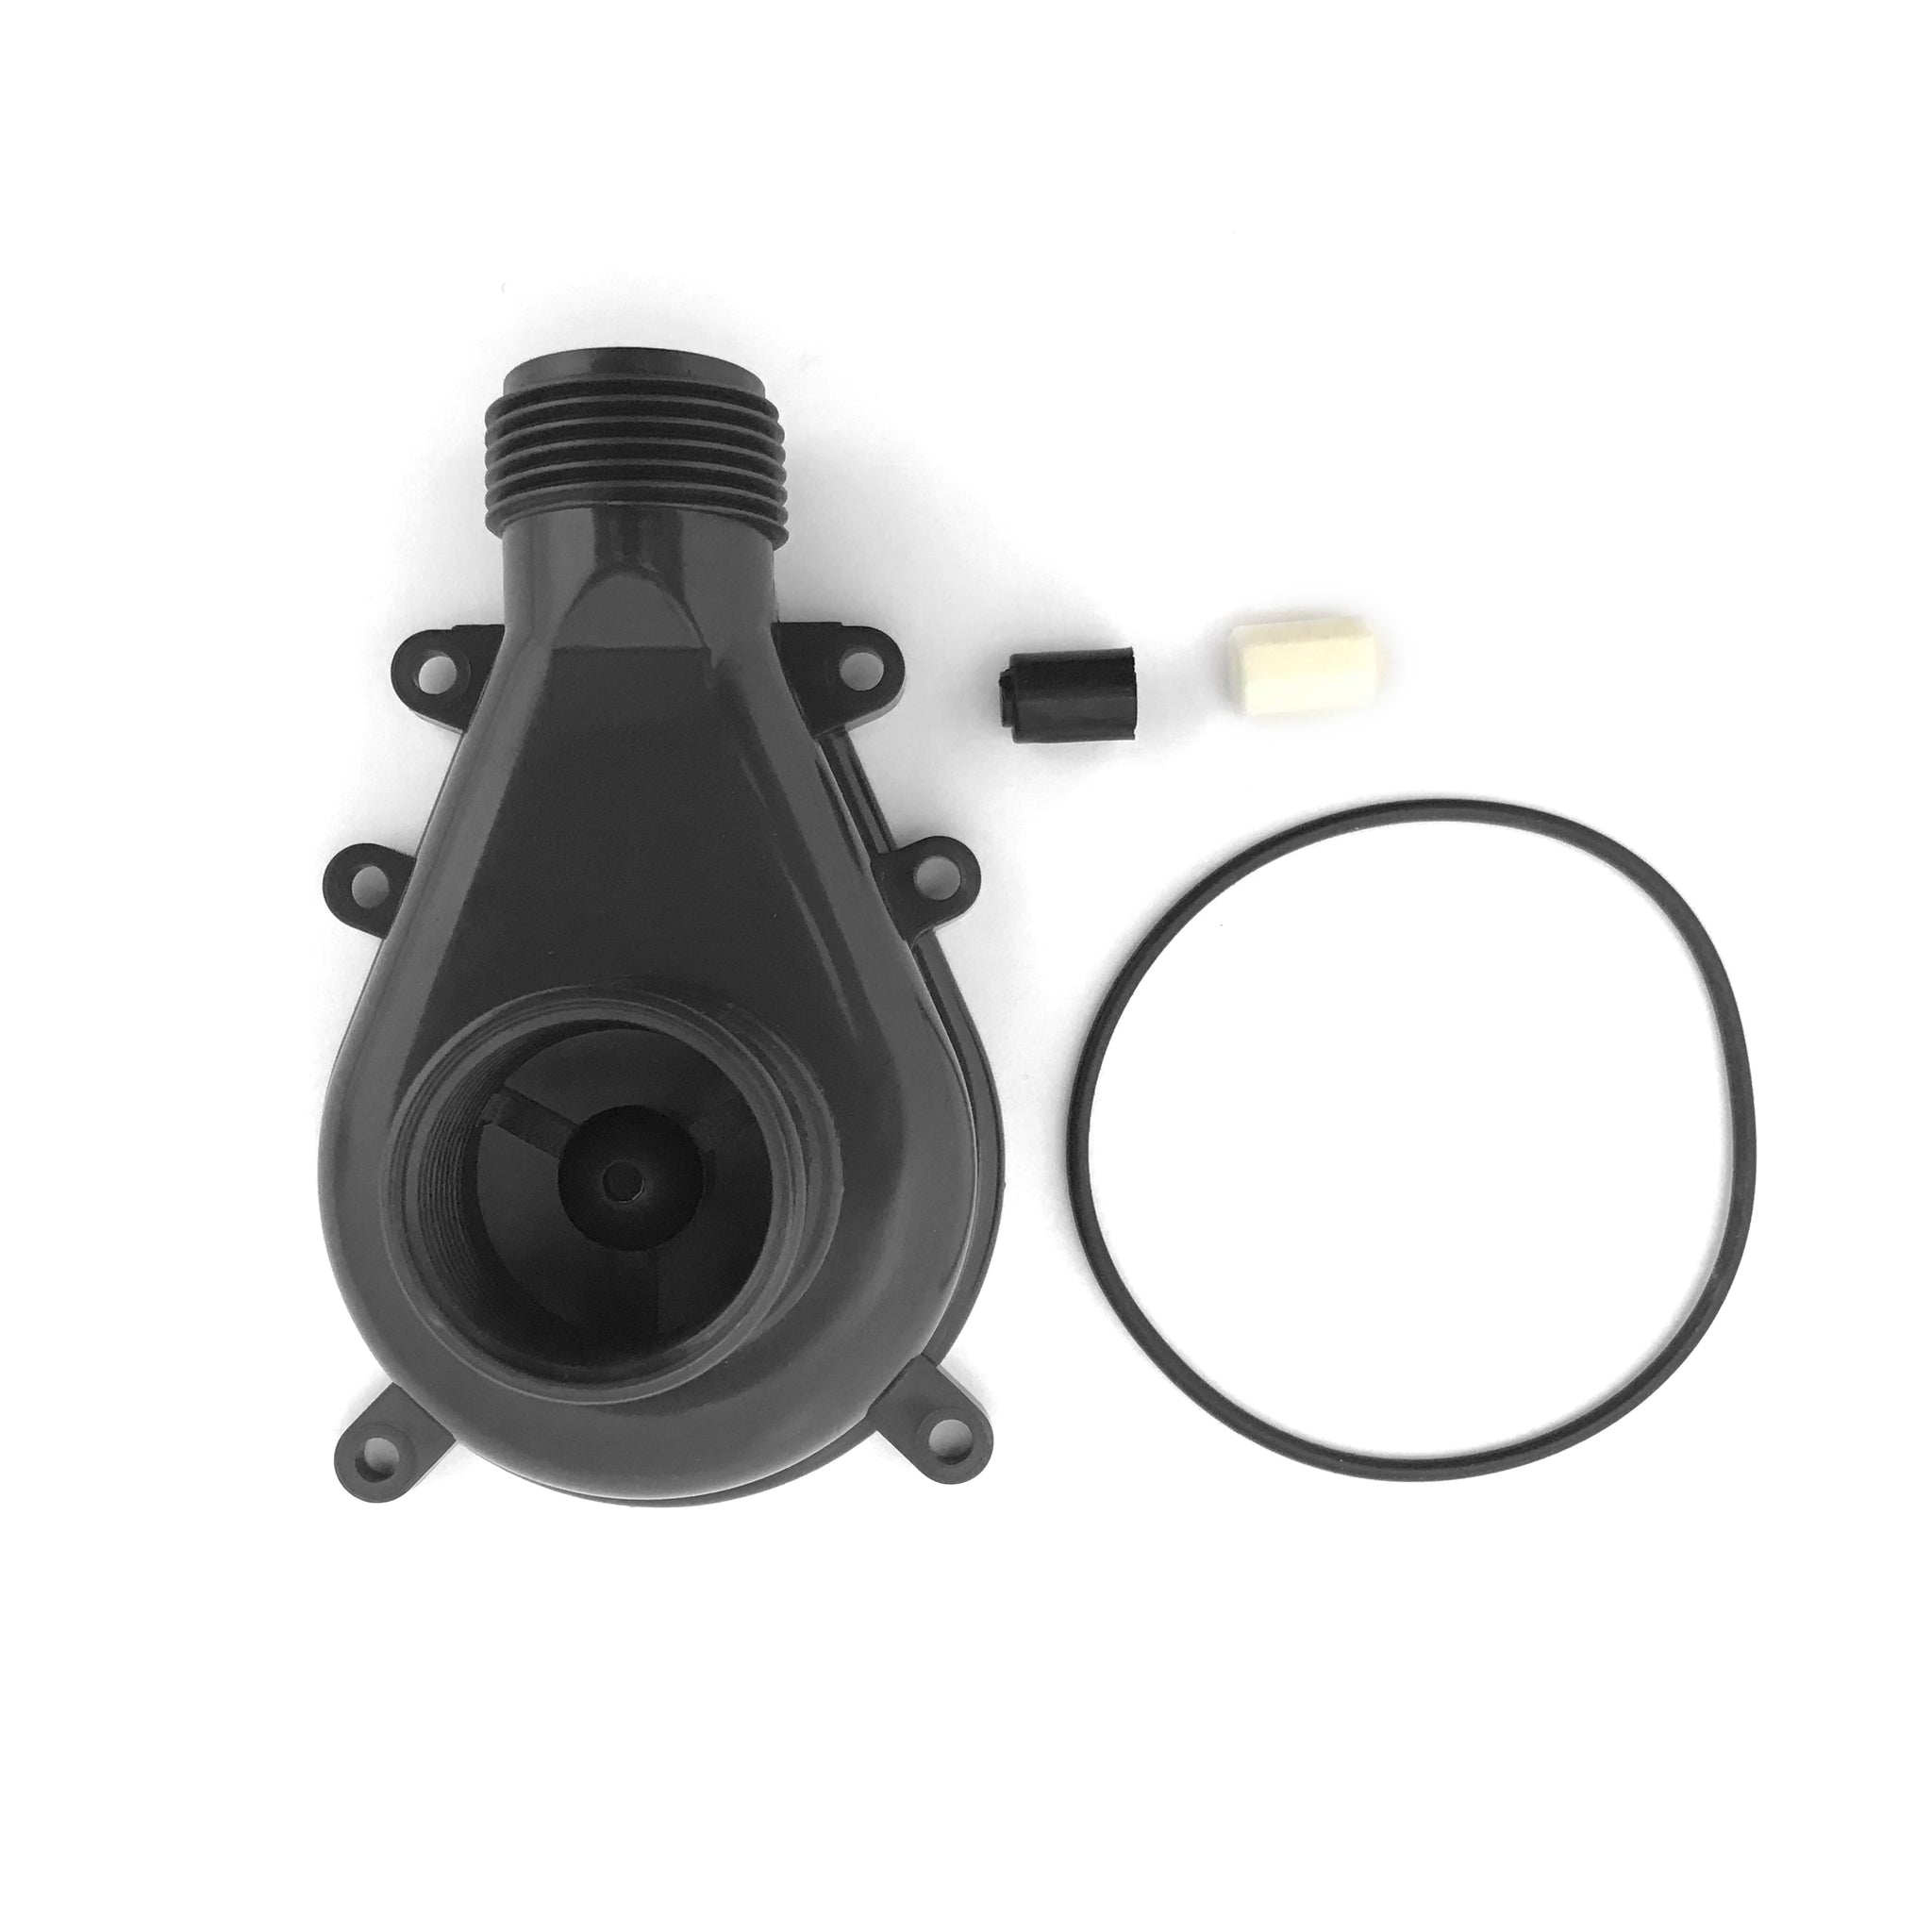 Replacement Pump Cover/Volute for Model 24 and Model 36 Mag Drive Pumps